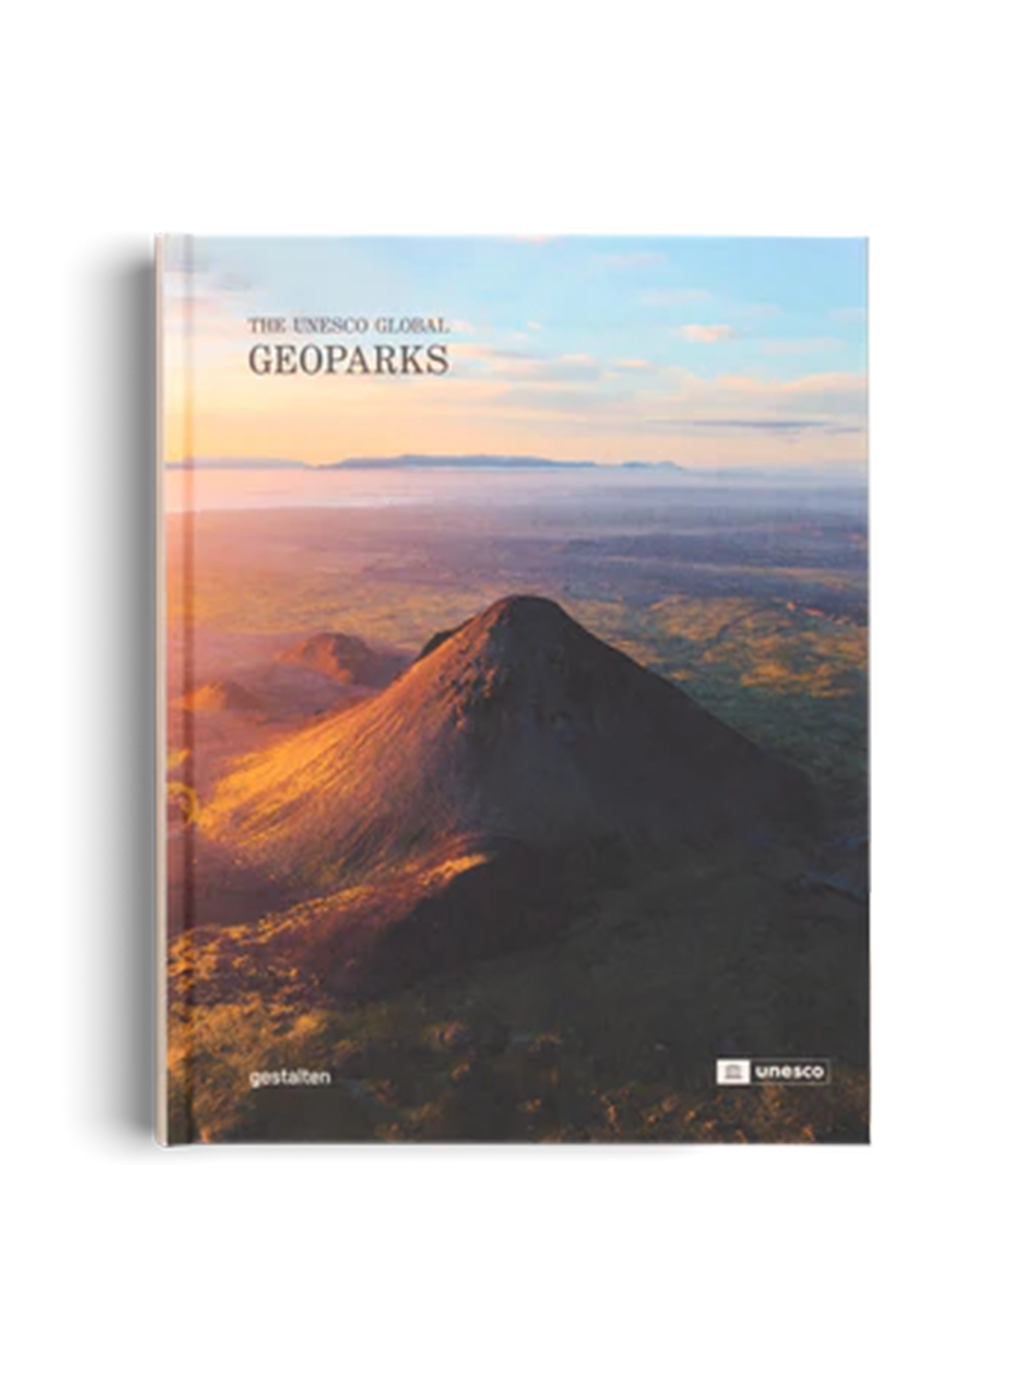 THE UNESCO GLOBAL GEOPARKS